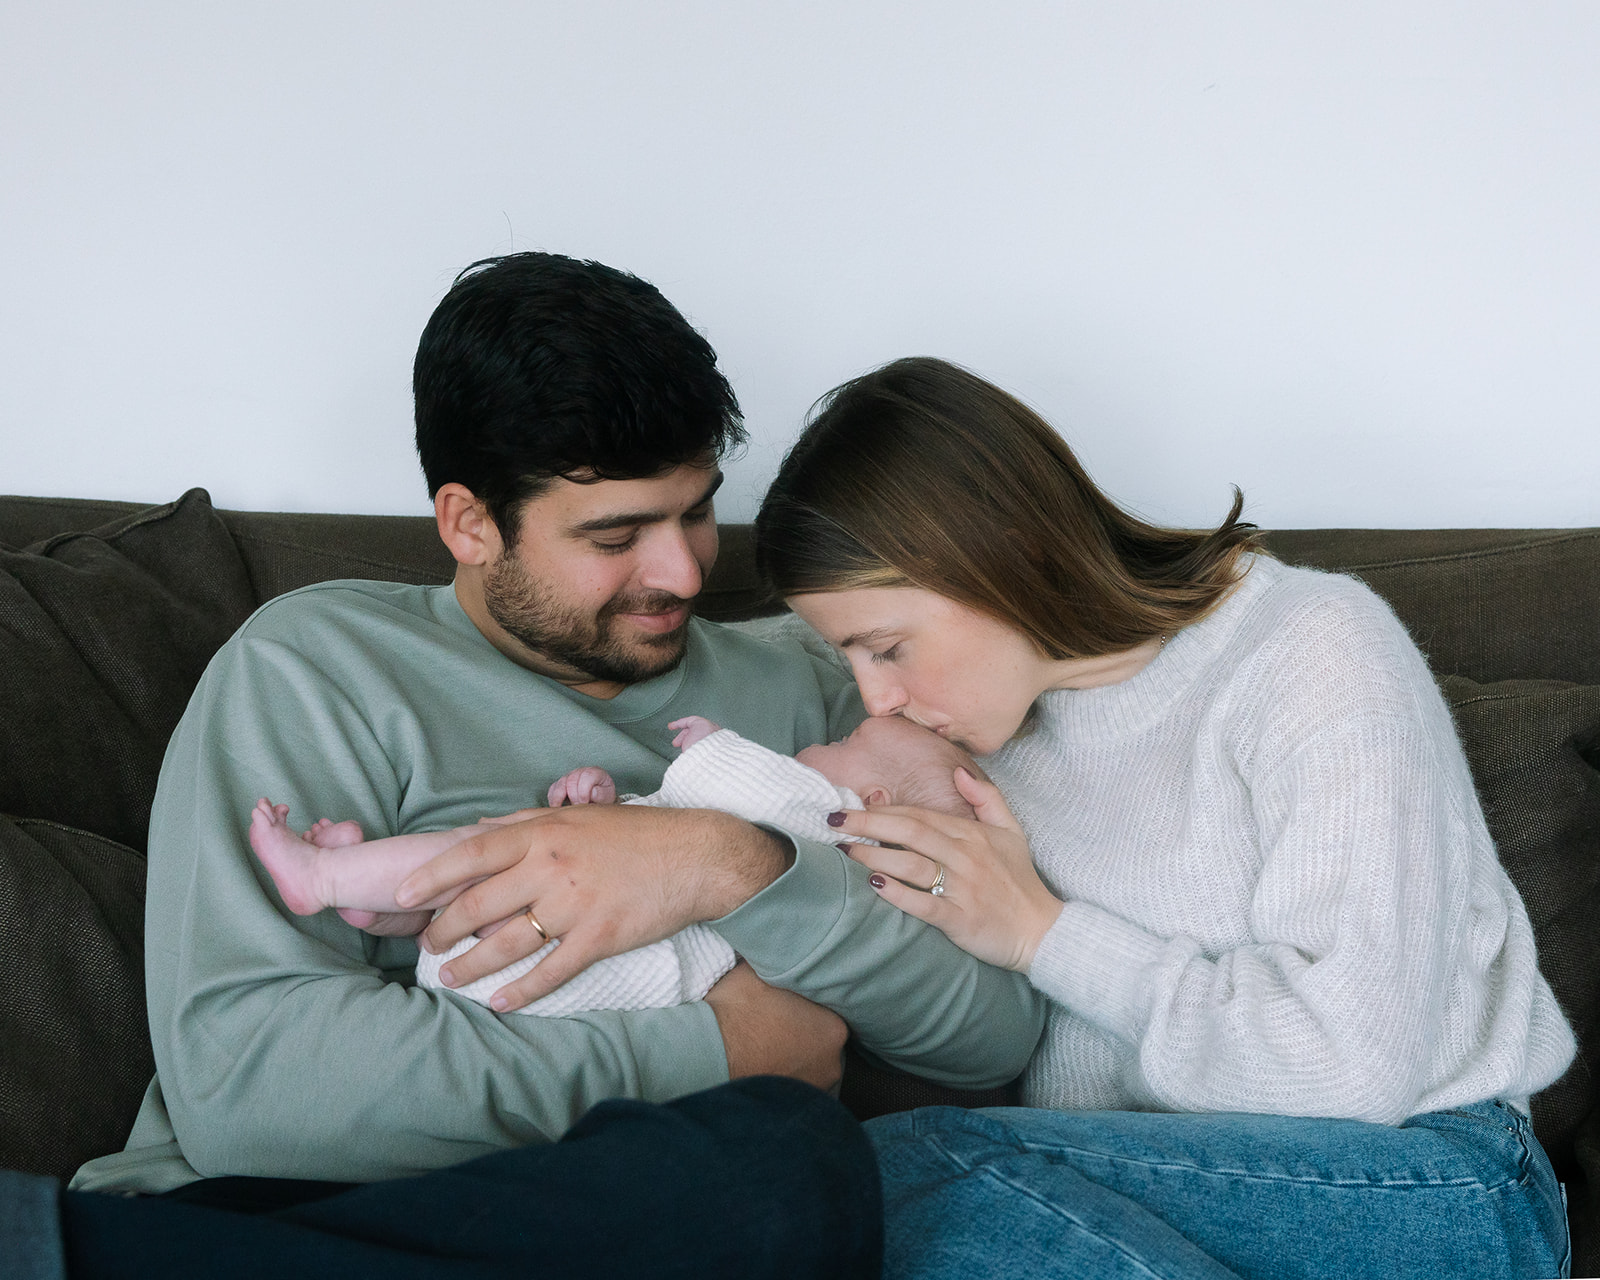 Mother and father sitting on their couch with their newborn baby